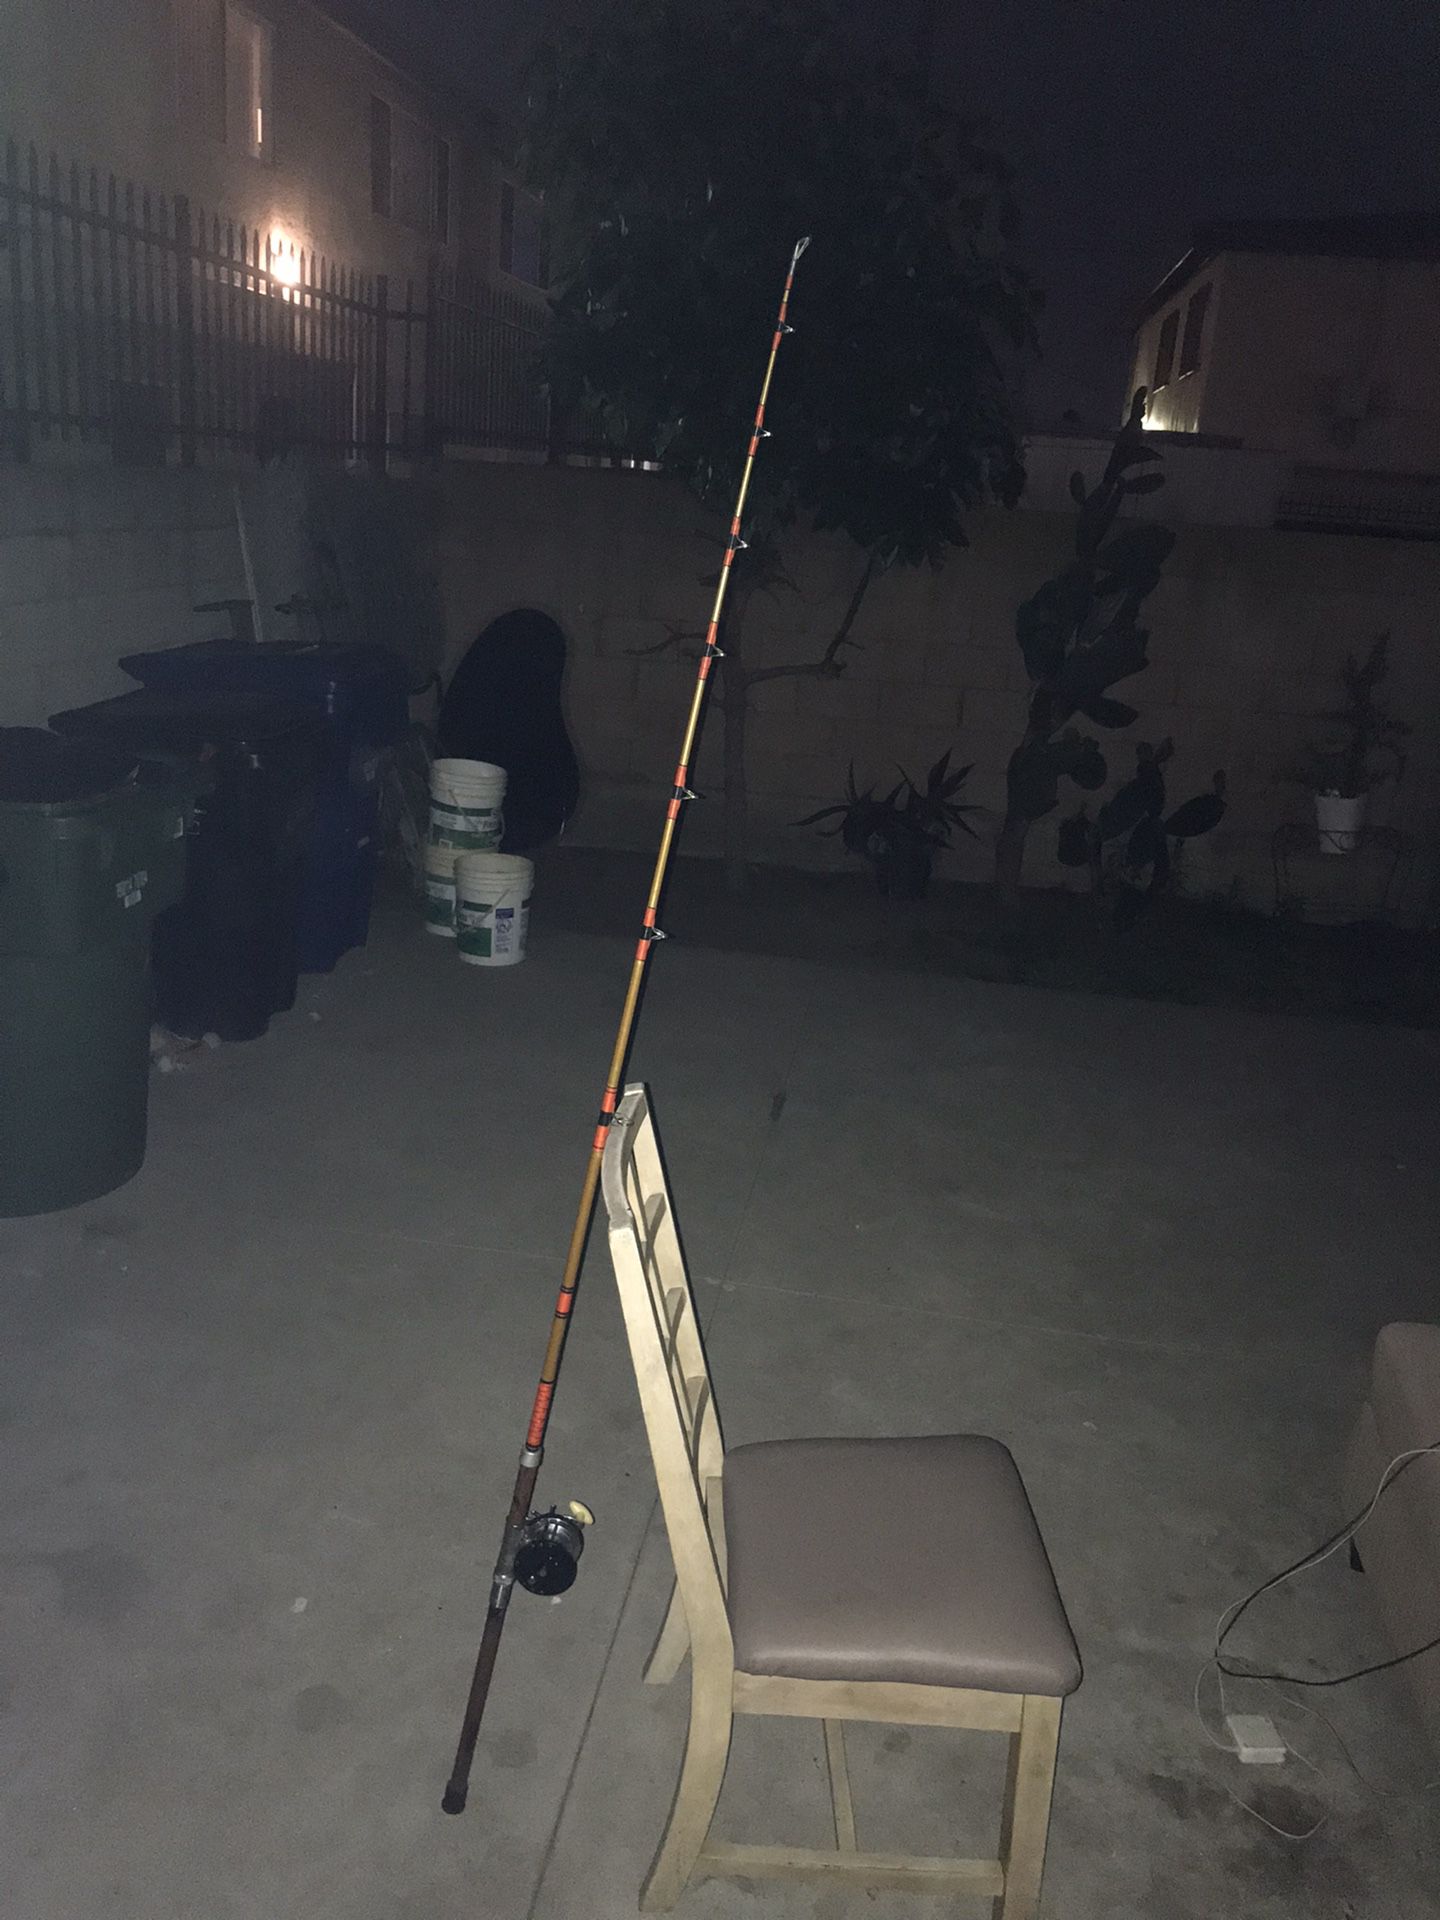 112 Ocean City Fishing Reel And Rod for Sale in Torrance, CA - OfferUp